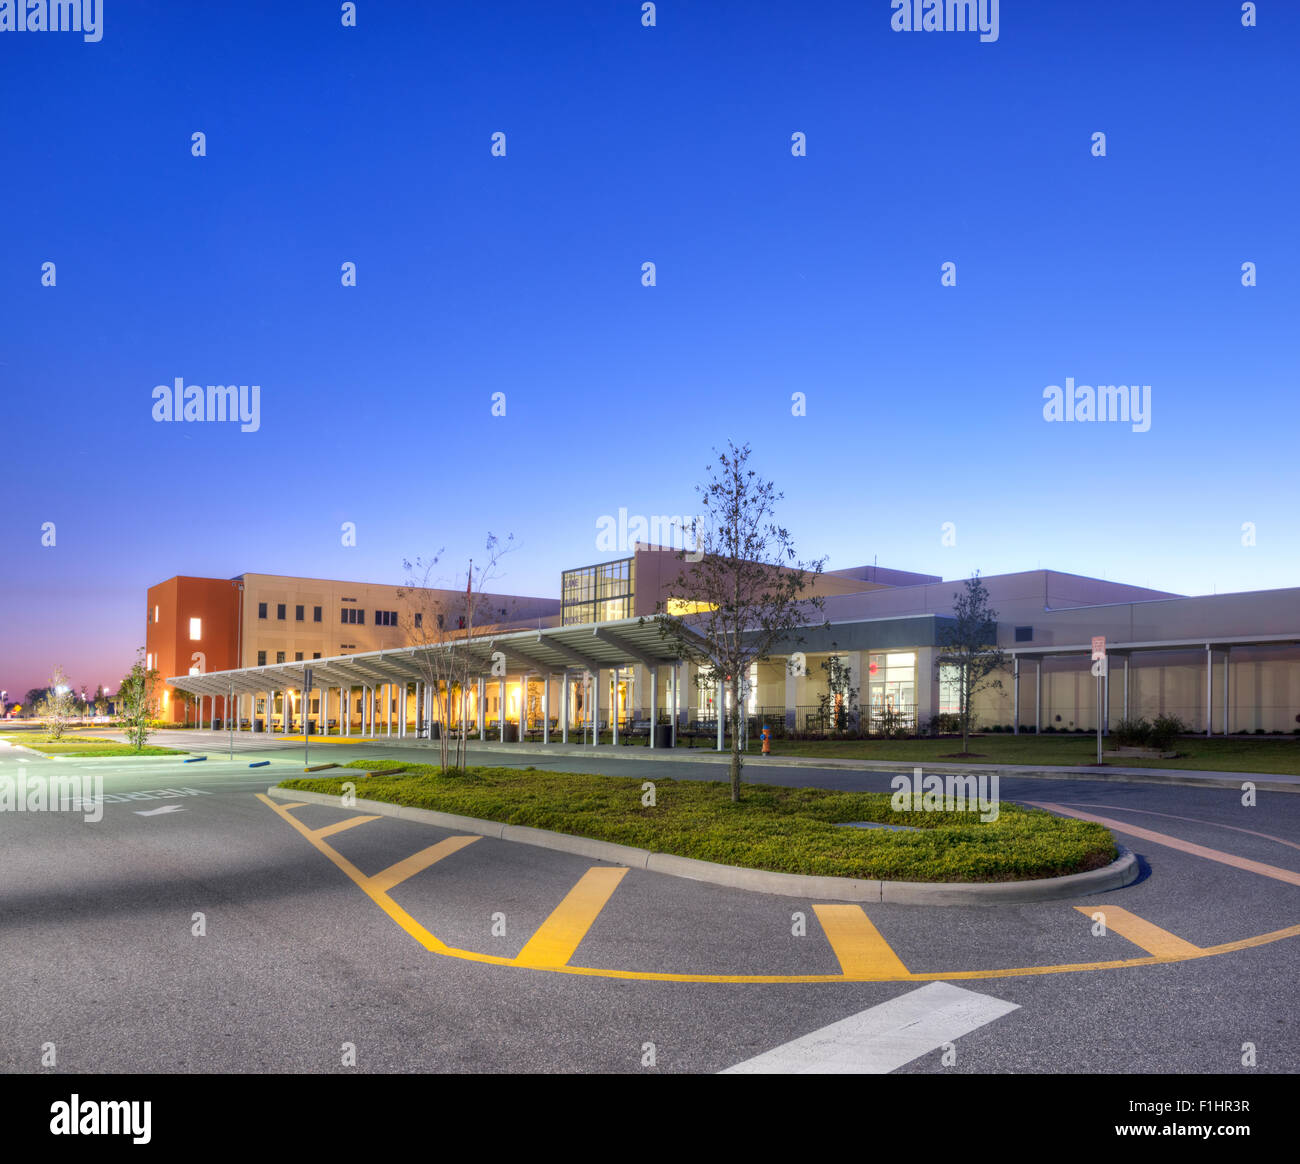 Middle School in Central Florida at Dusk. Stock Photo